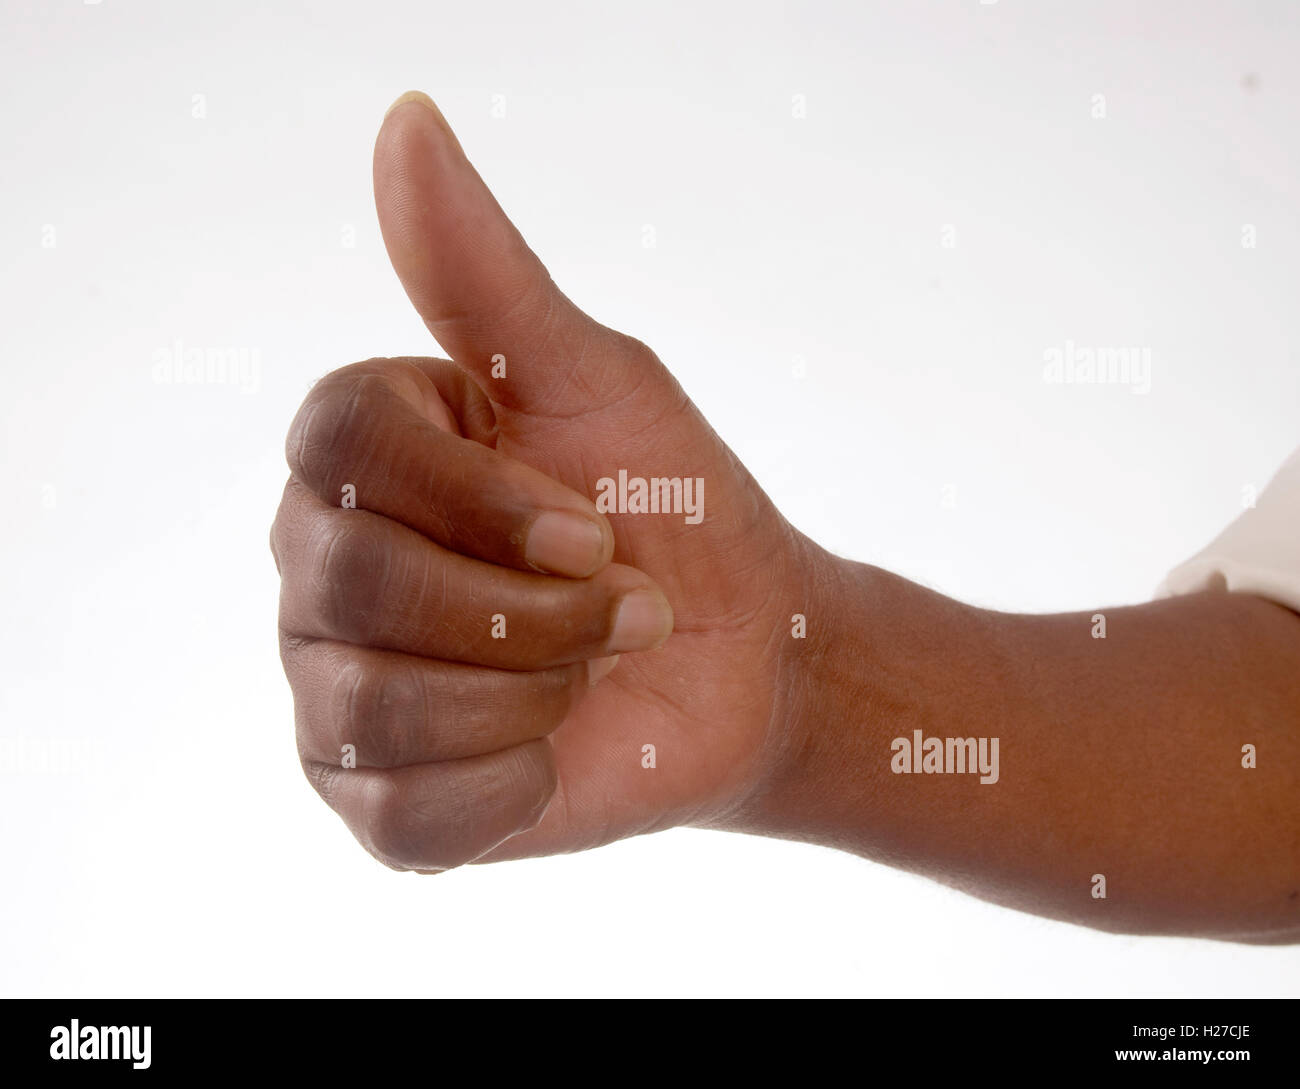 African's hand giving the thumb's up sign Stock Photo